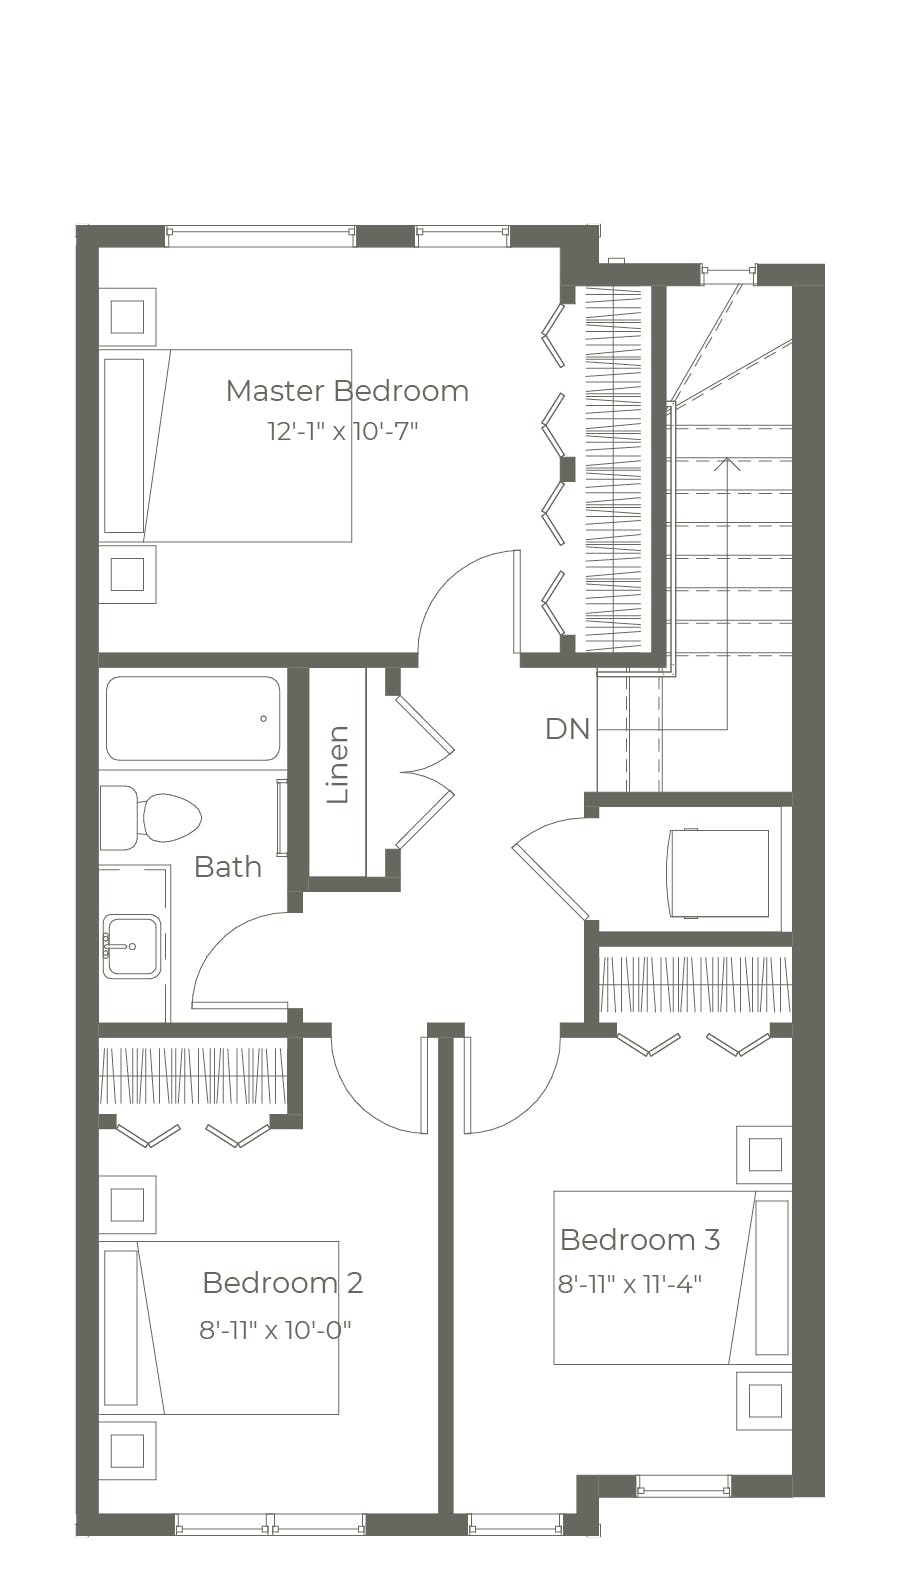  Floor Plan of Symon Towns by Partners with undefined beds